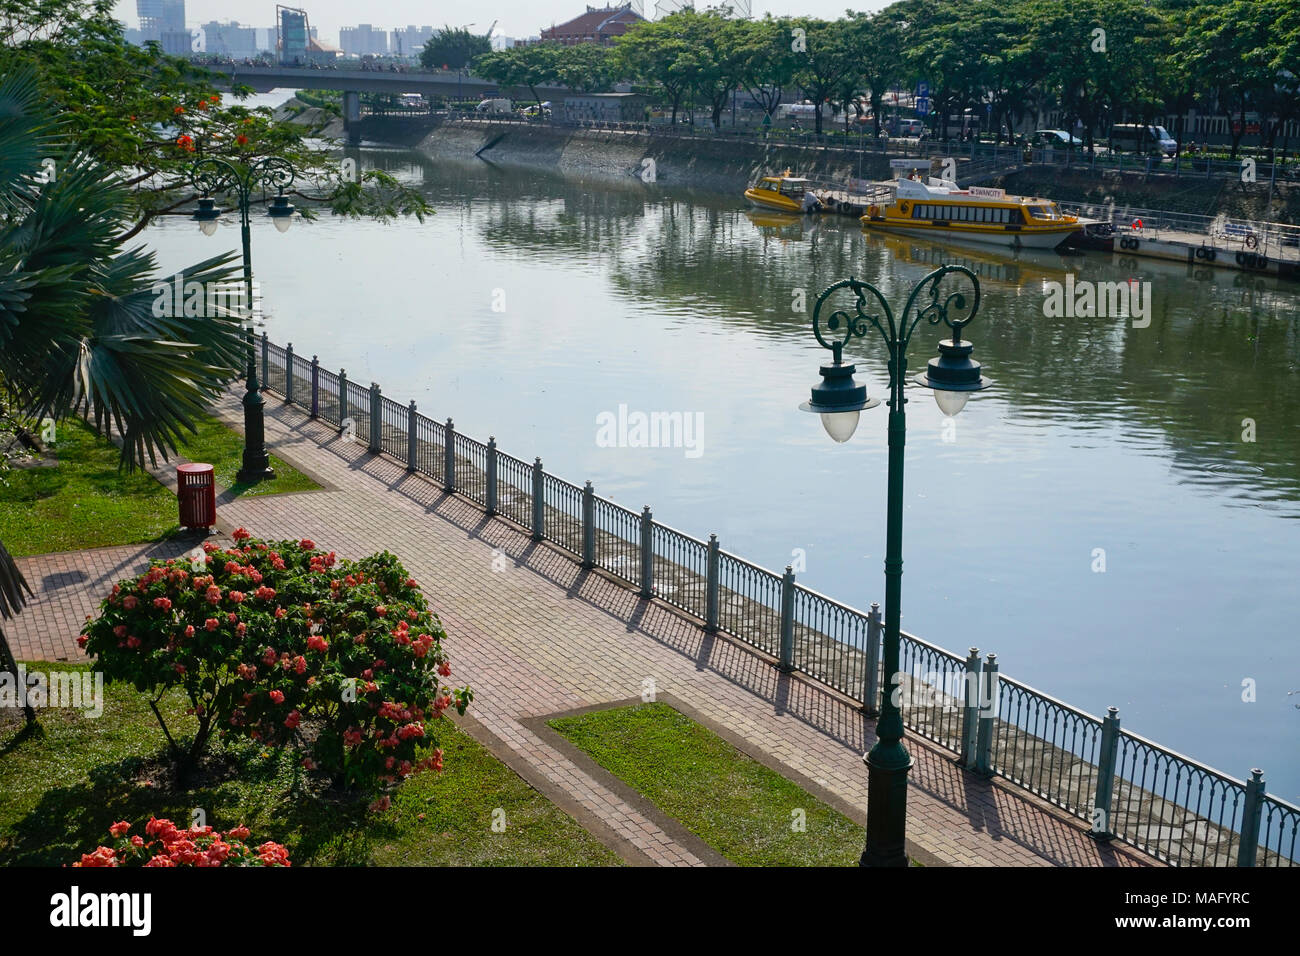 Rach Ben Nghe canal, a tributary of the Saigon River in Ho Chi Minh City, Vietnam. Stock Photo